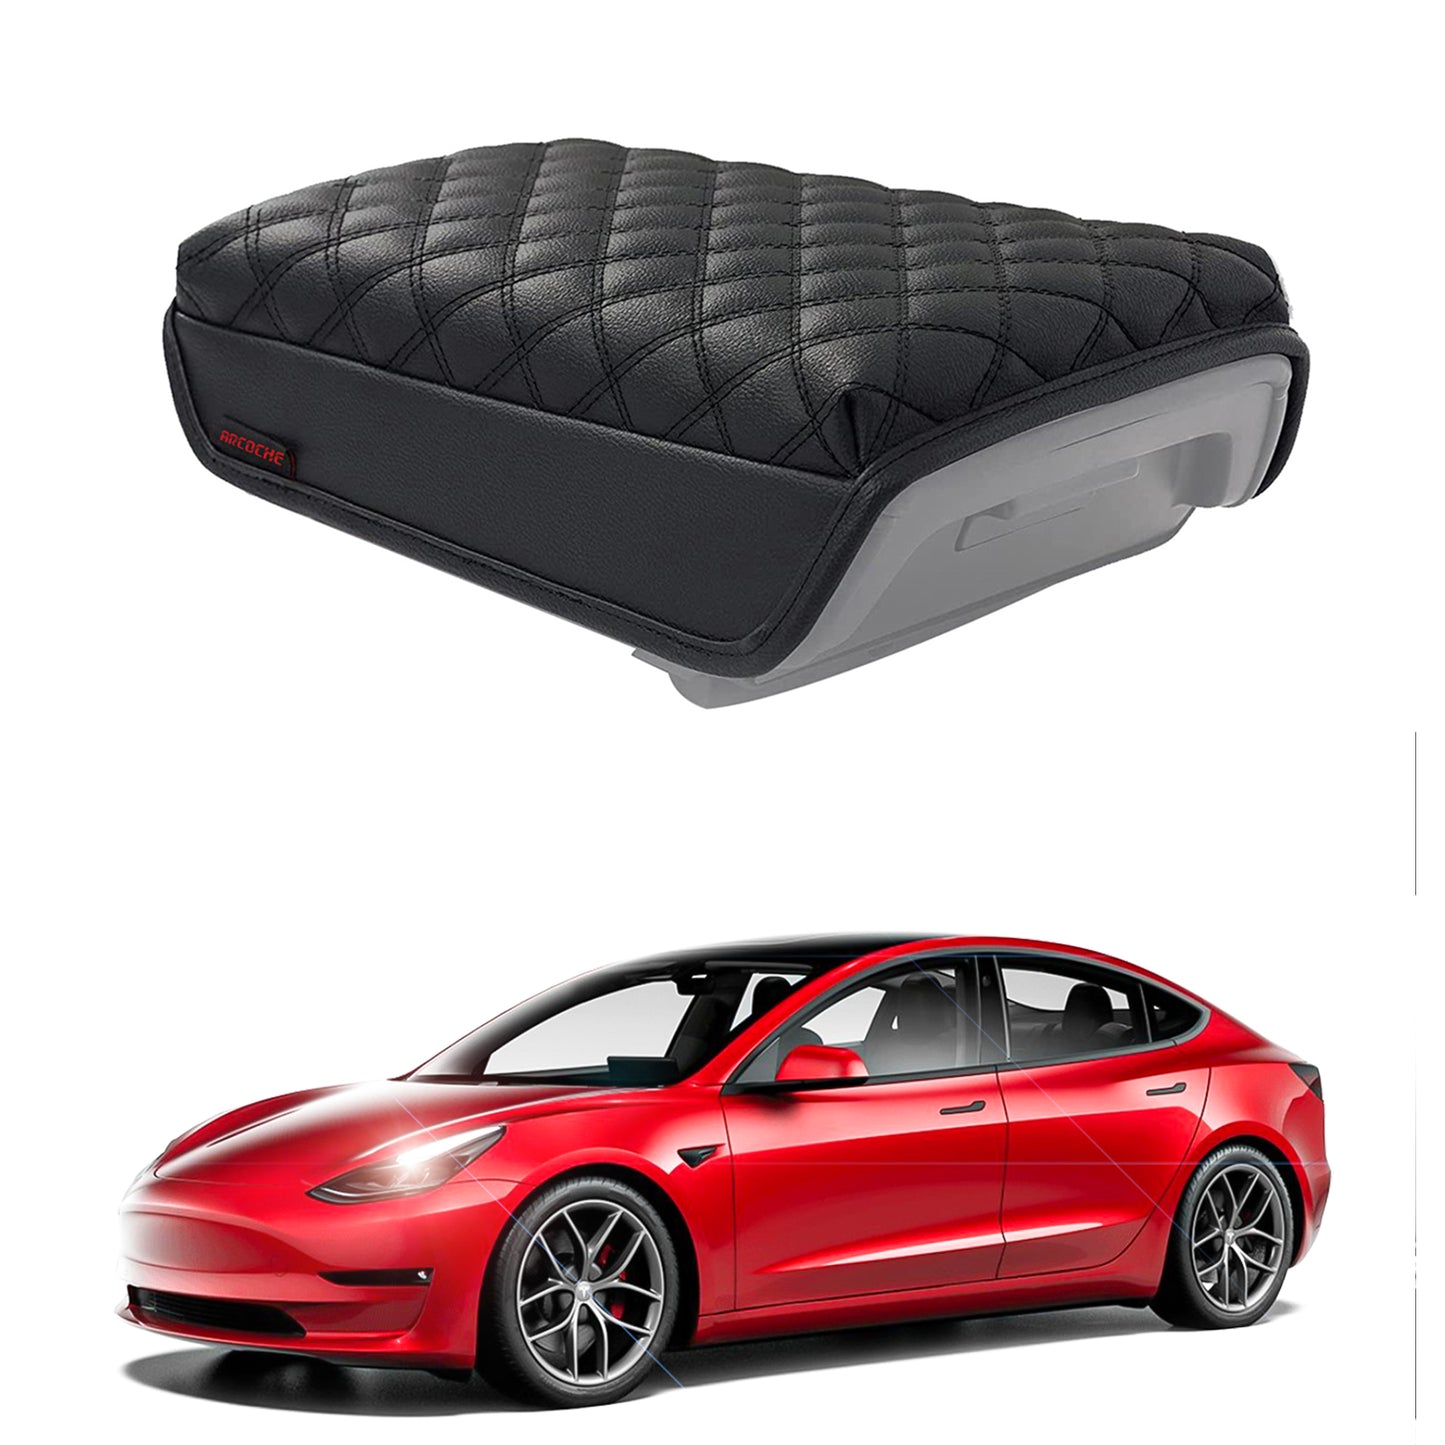 armrest cover pad PU leather center console protect tesla model 3 Y car 2022 2023 2021 arcoche accessories accessory aftermarket price Vehicles standard long range performance sr+ electric car rwd ev interior exterior diy decoration price elon musk must have black white red blue 5 7 seats seat